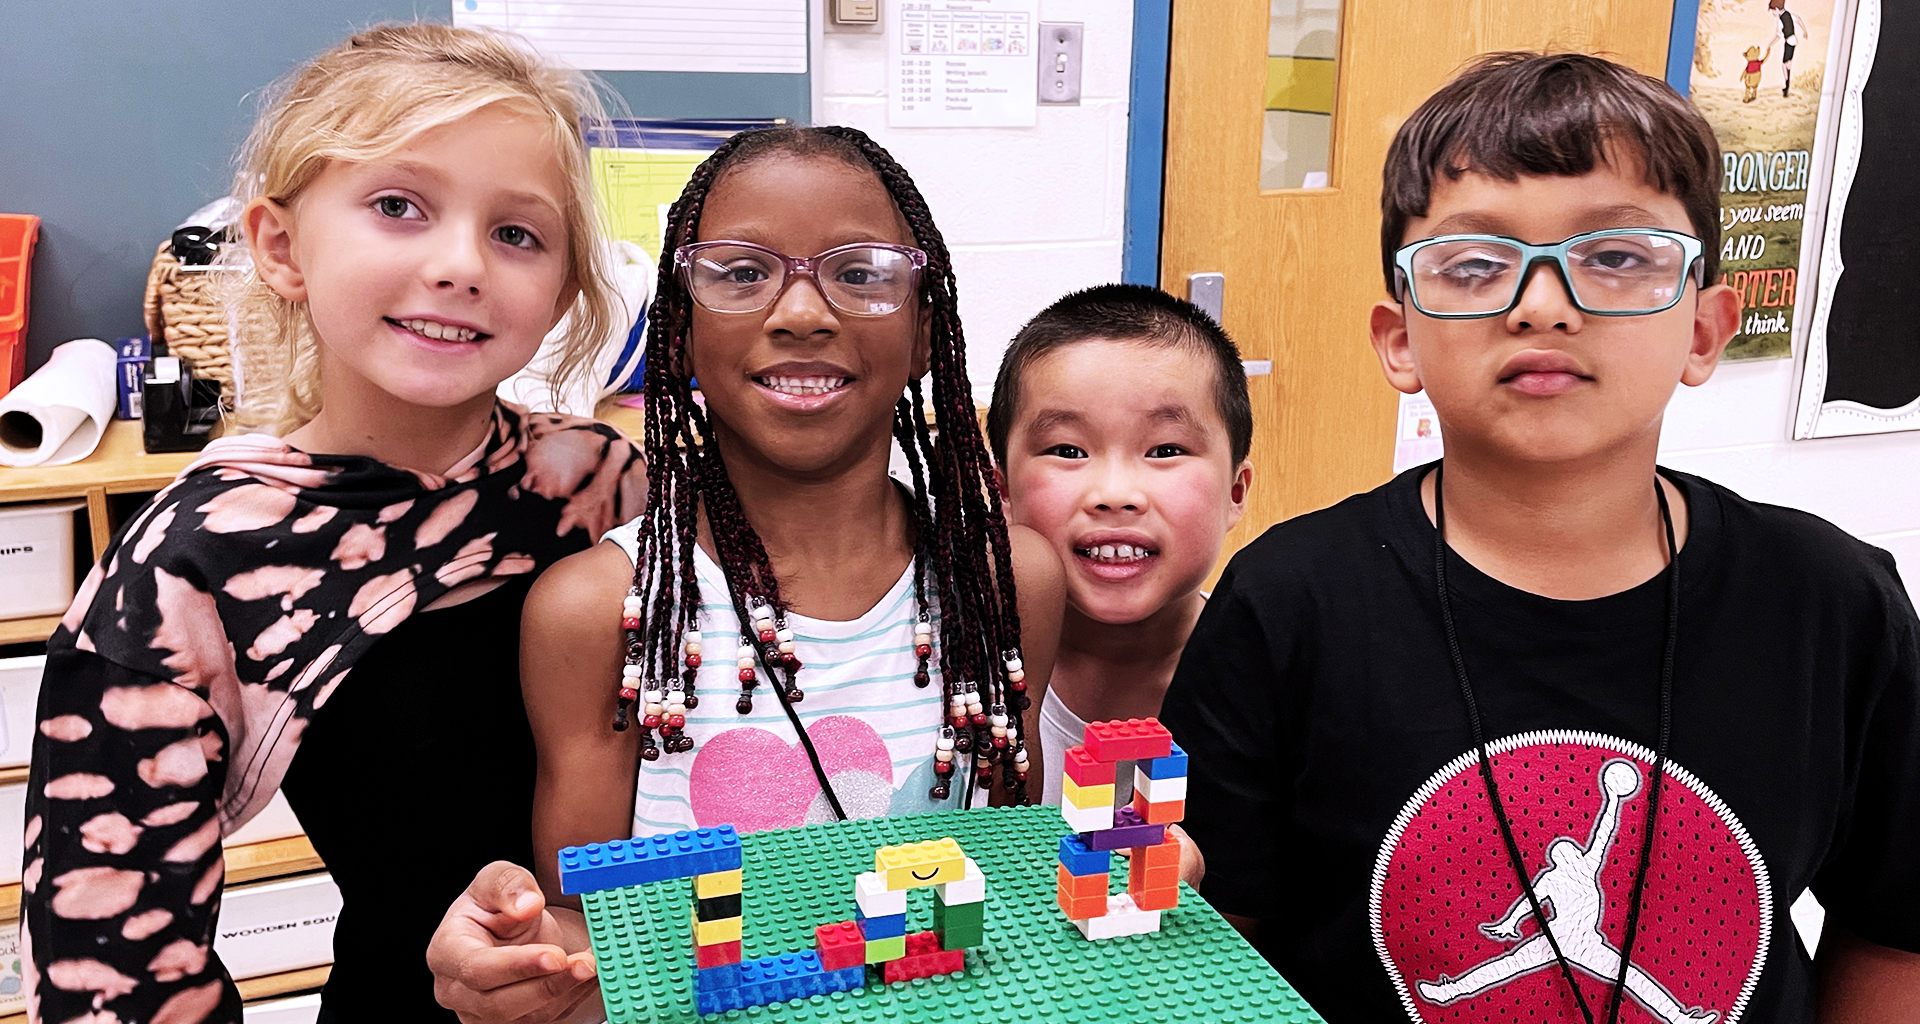 Four students show off their lego project